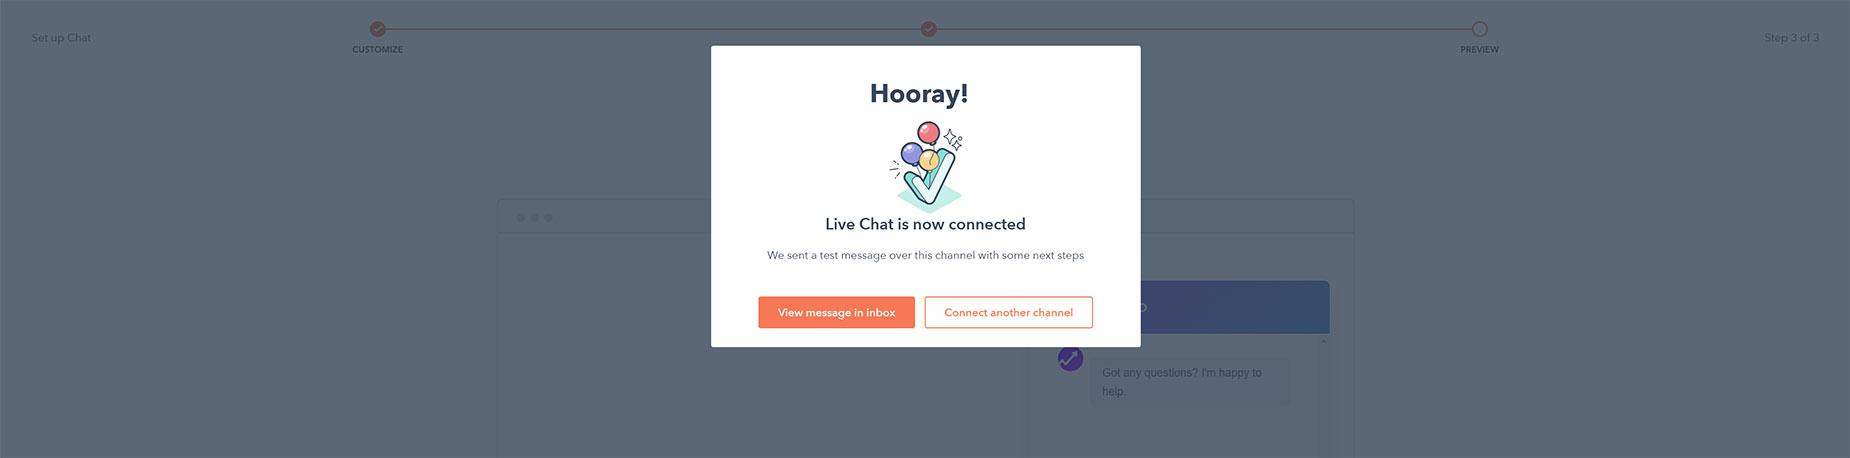 Published Hubspot Live Chat